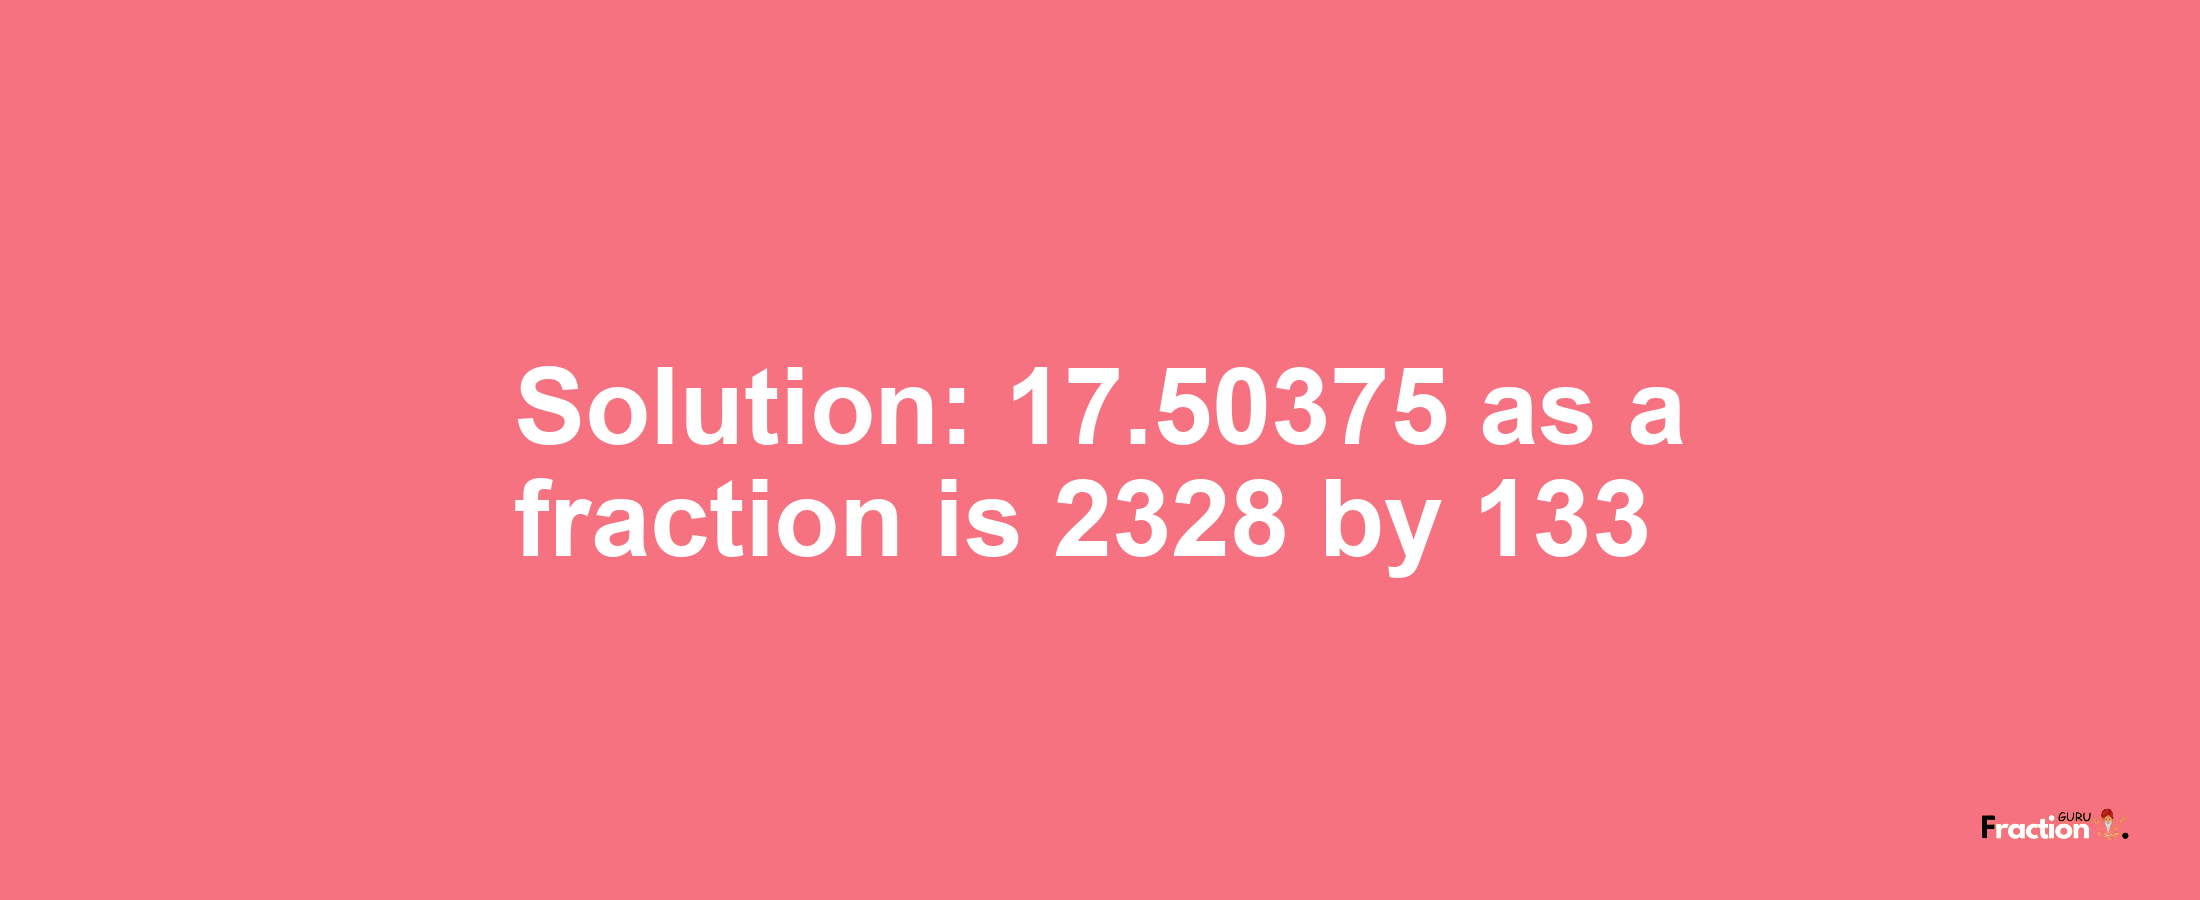 Solution:17.50375 as a fraction is 2328/133